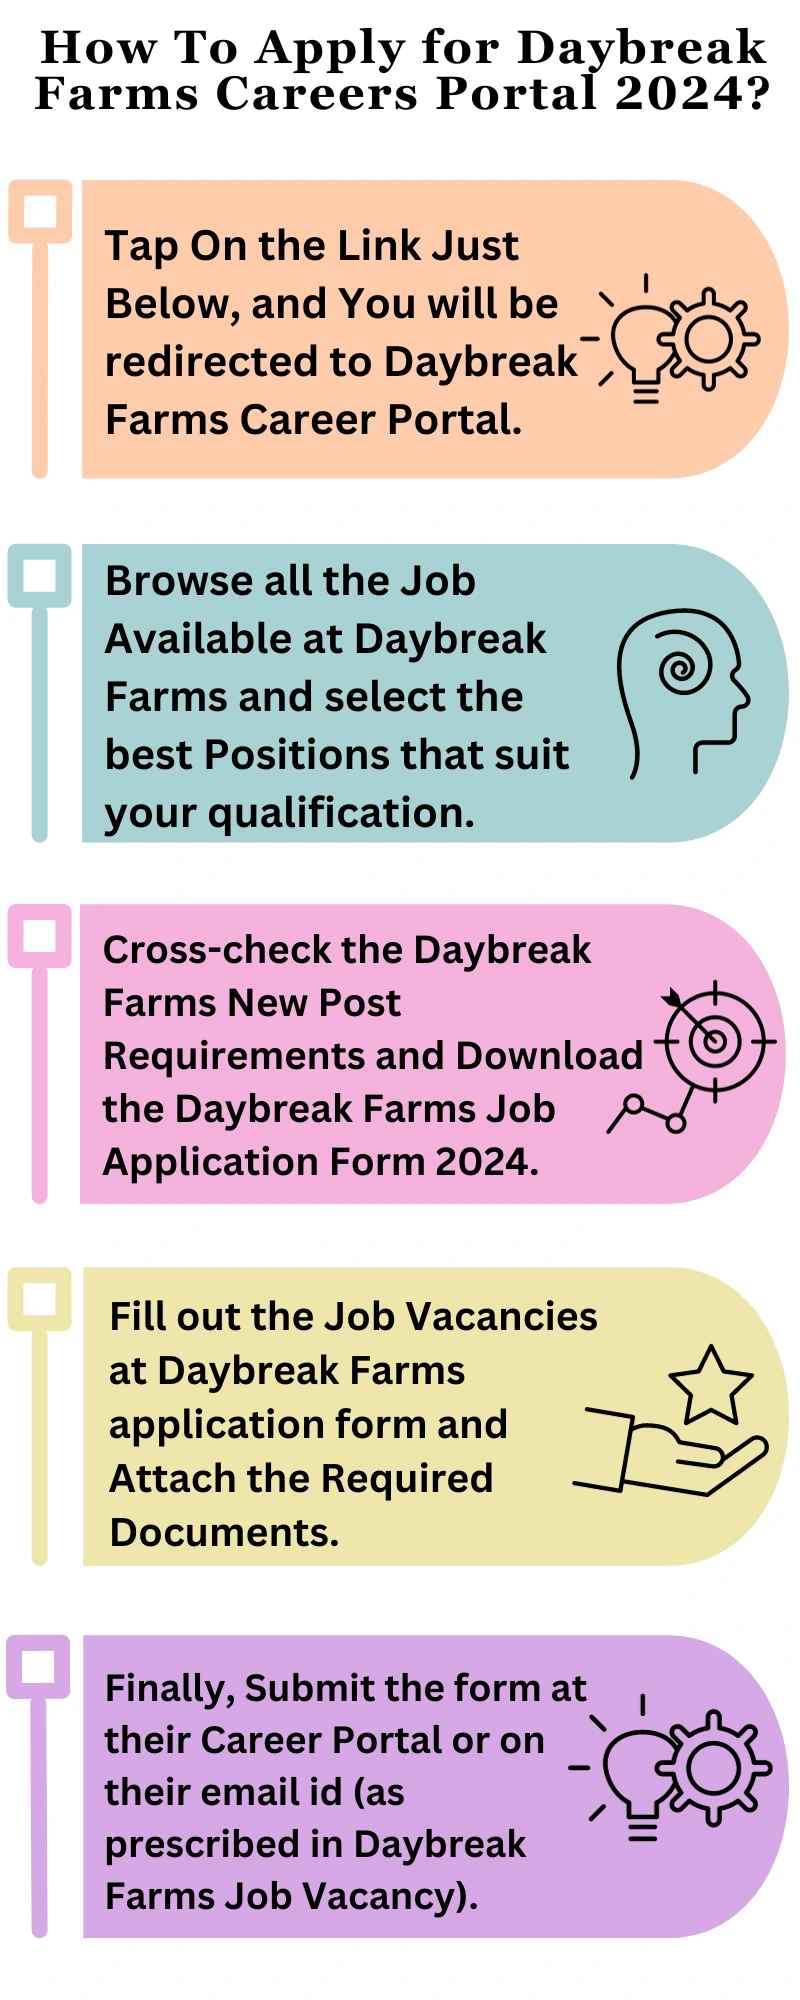 How To Apply for Daybreak Farms Careers Portal 2024?